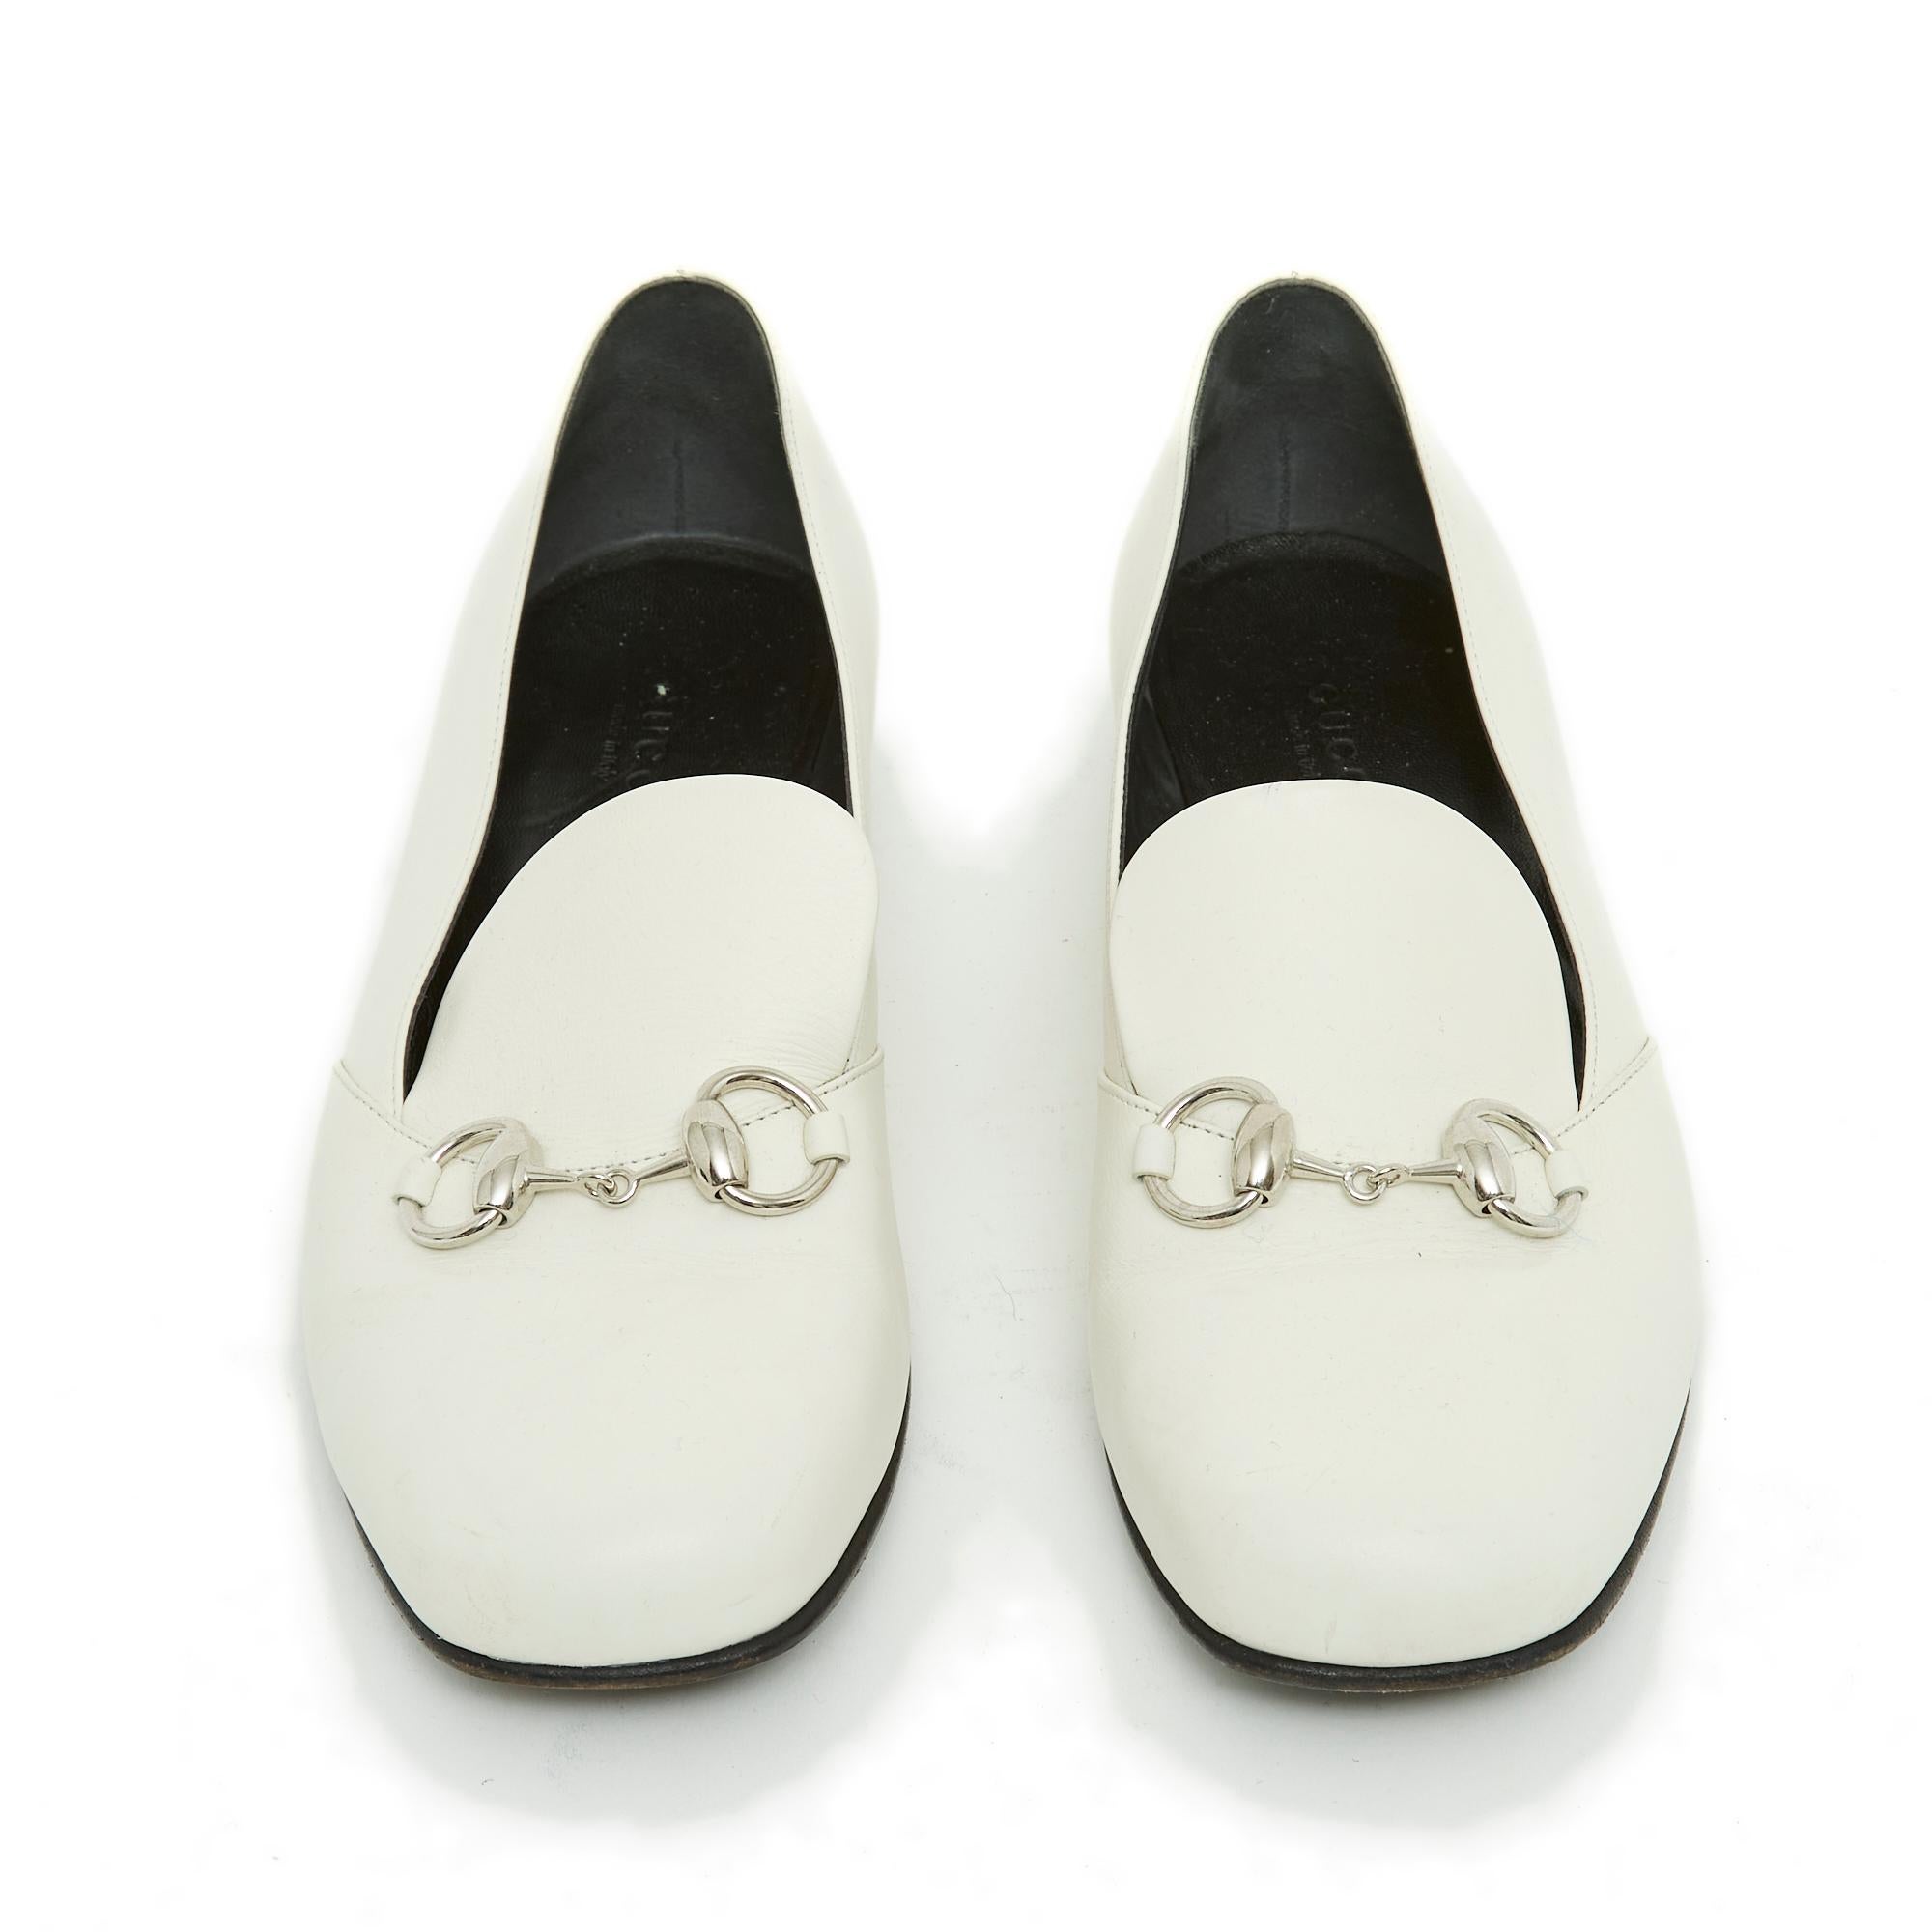 Gucci Horsebit model moccasins or ballerinas in white leather and silver metal horsebit pattern, rounded square toe, black leather outsole. Size 38EU, heel 0.5 cm, insole 24 cm. The shoes have already been worn but they are in very good condition,